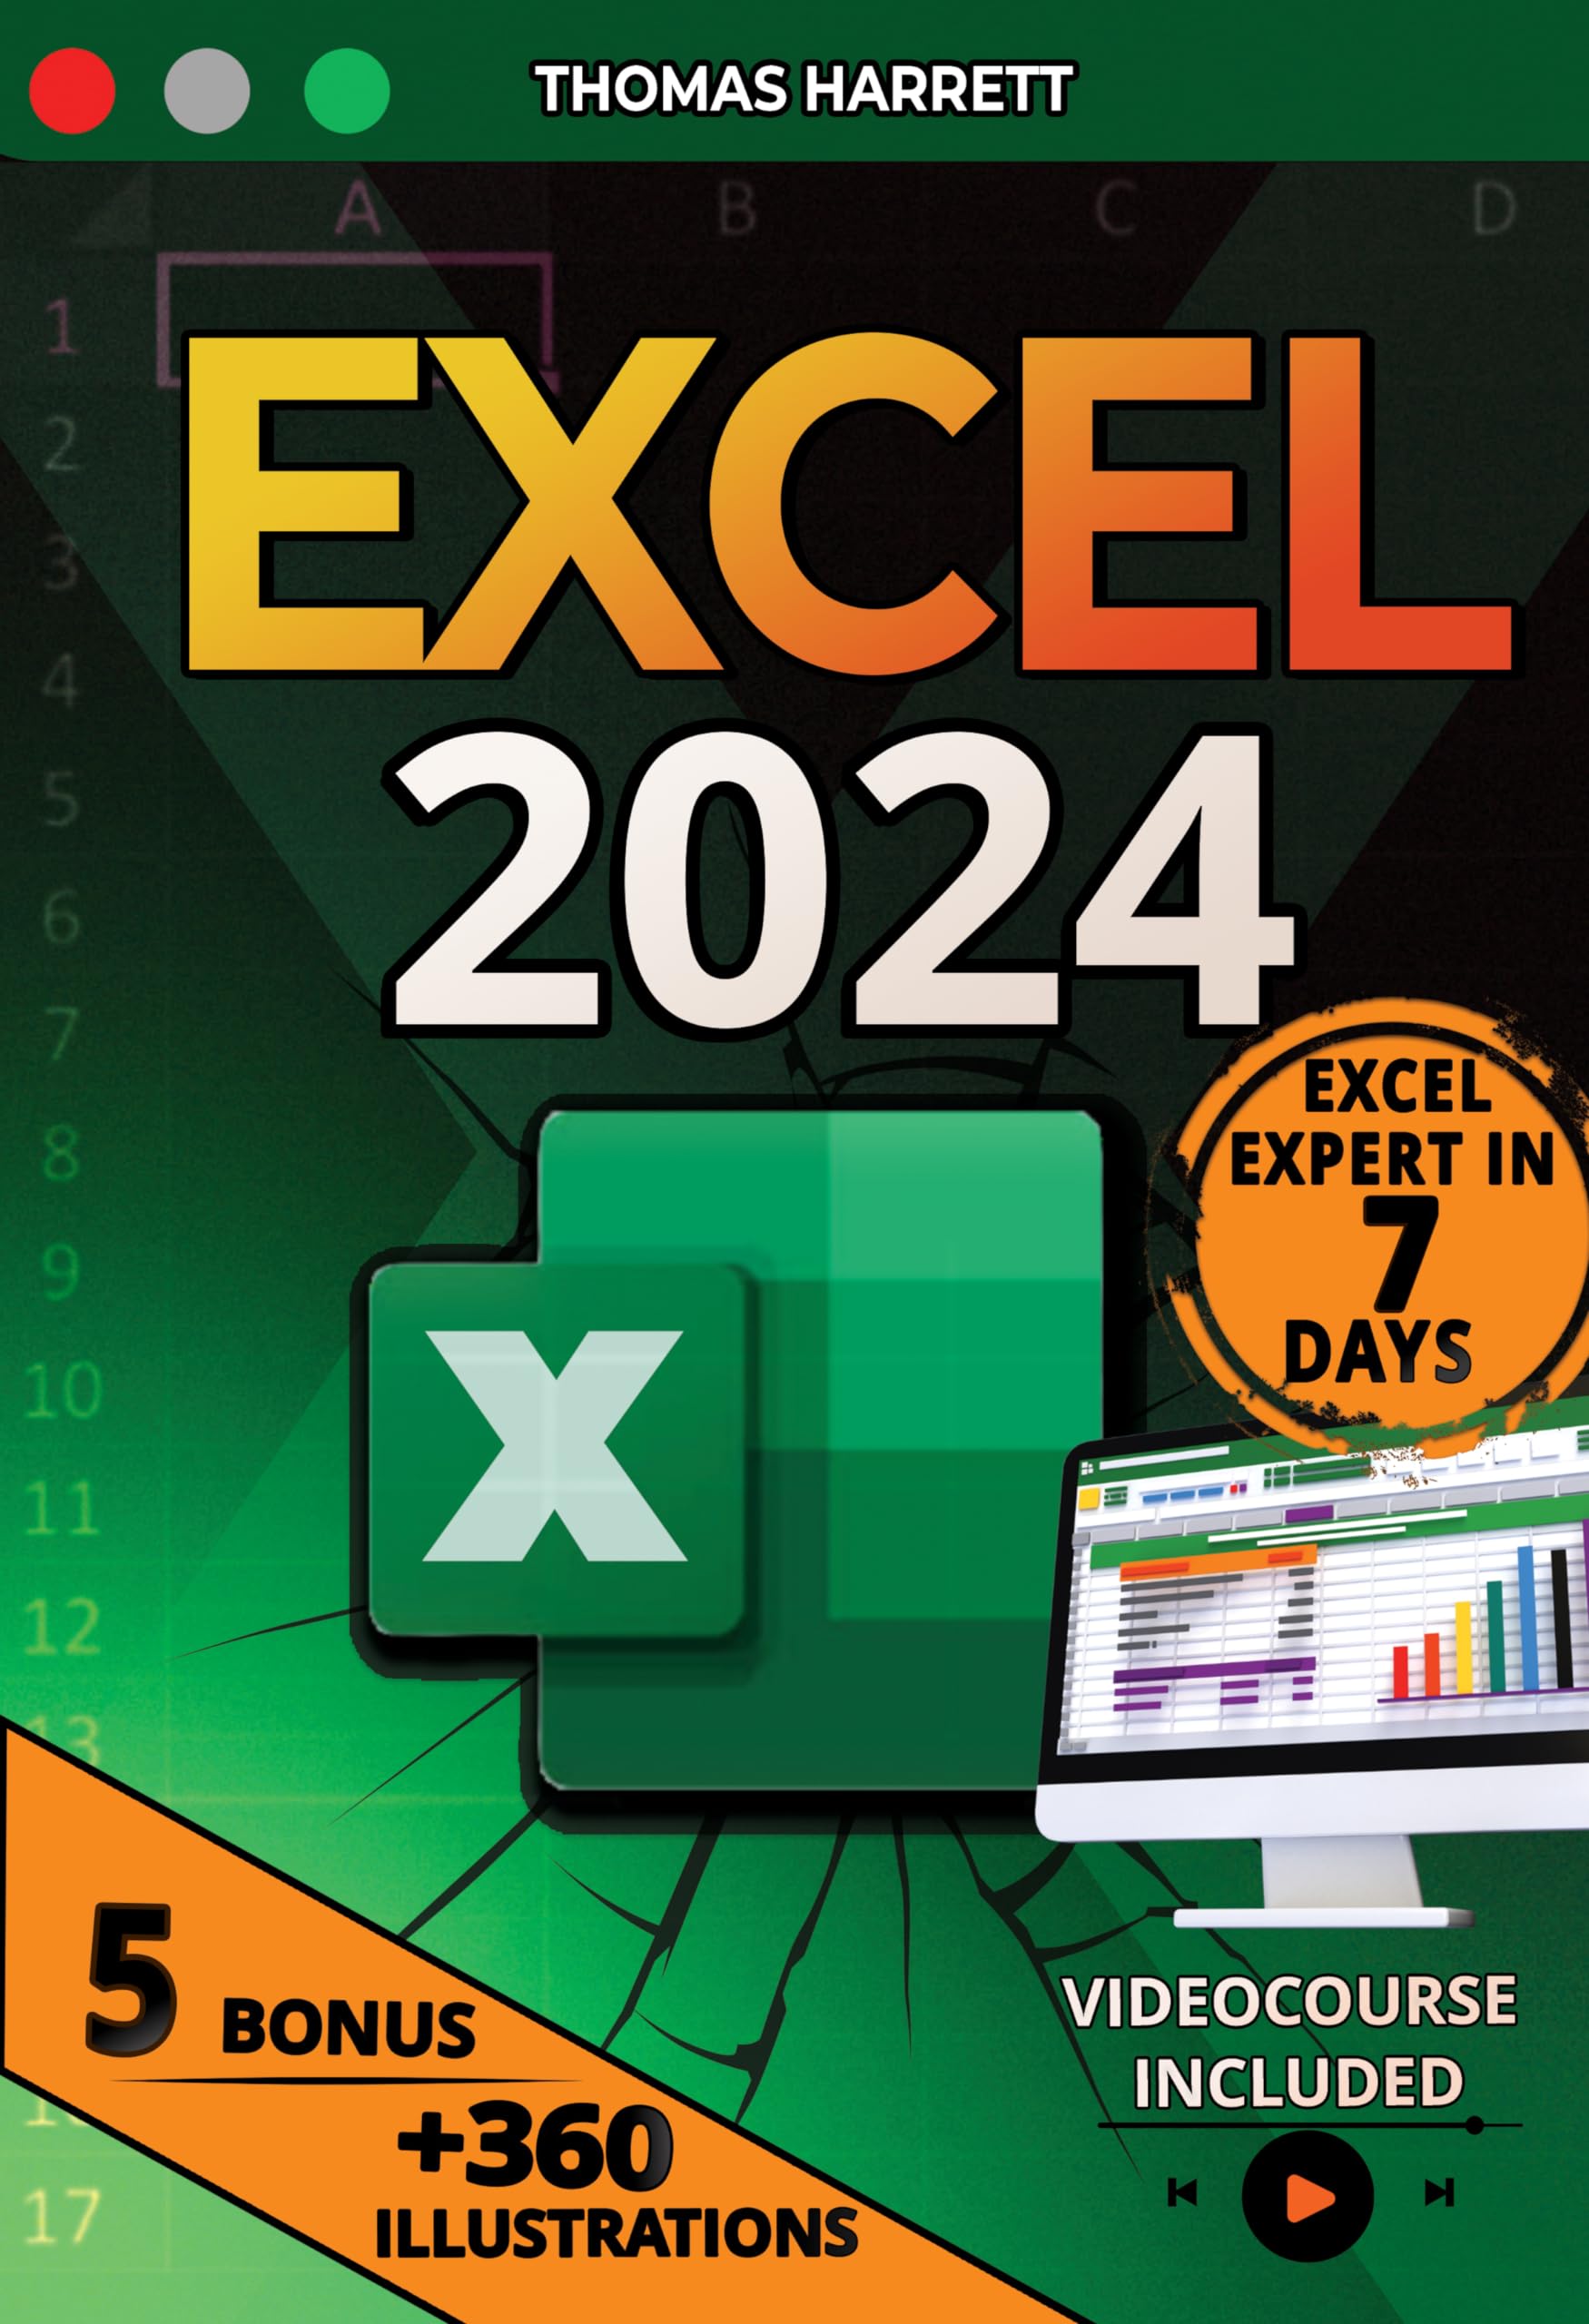 EXCEL: The Easy and Complete Guide to Master Excel in 7 Days, From Beginner to Pro with Over 360 Illustrative Examples, +100 Exercises, Formulas and Step-by-Step Tutorials for Quick Learning